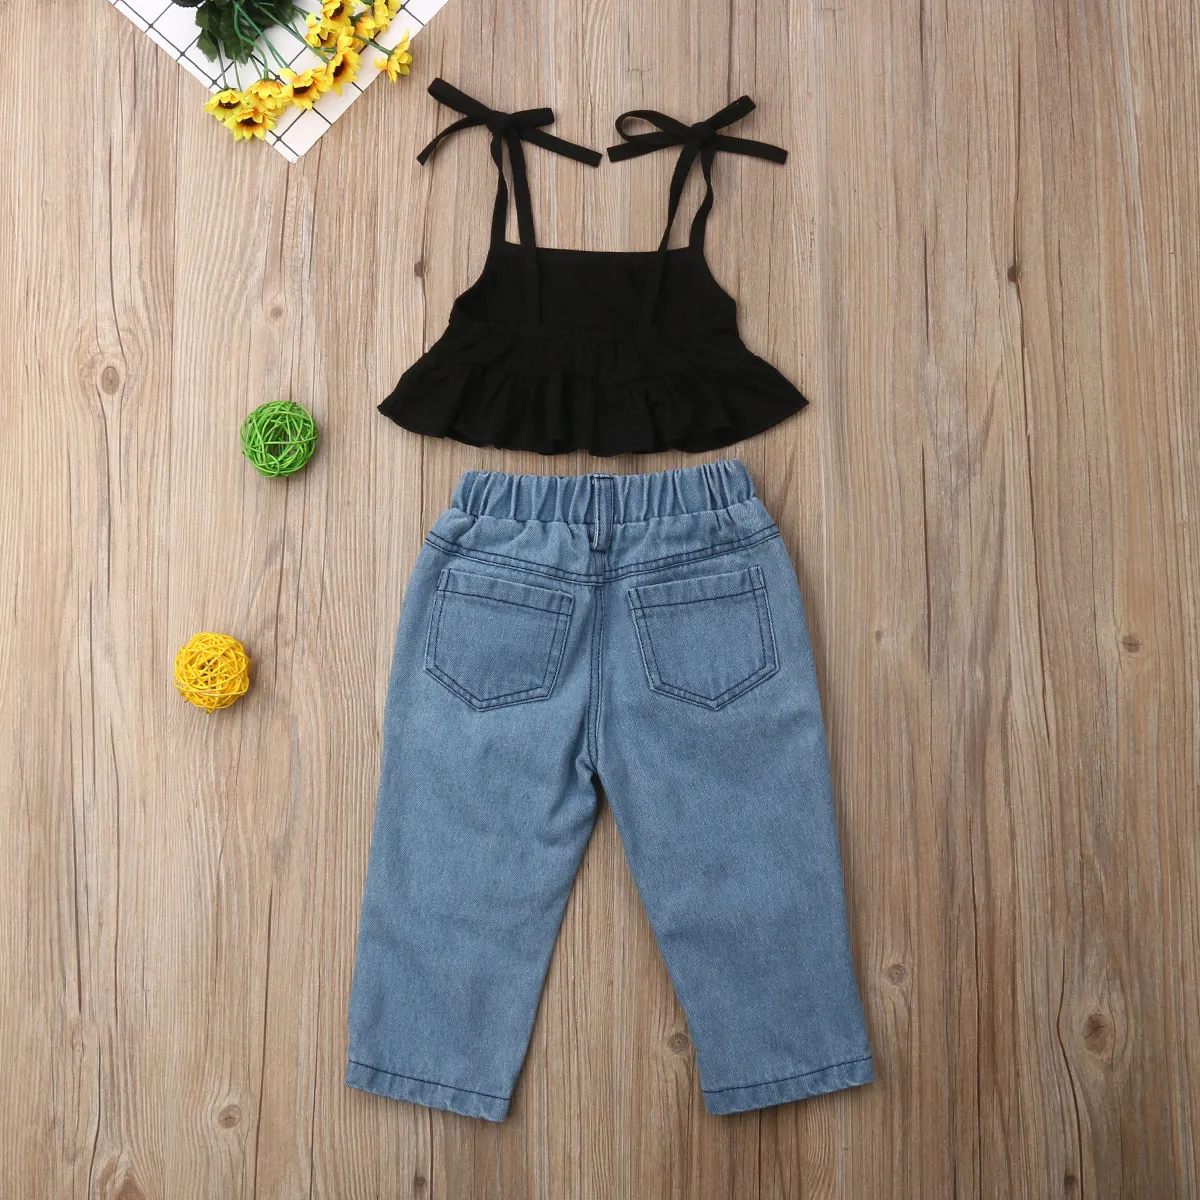 2021 New Fashion Toddler Kids Baby Girl Strap Vest Tops Fishnet Ripped Denim Pant Jeans Outfits Children Girls Clothing Set235334201